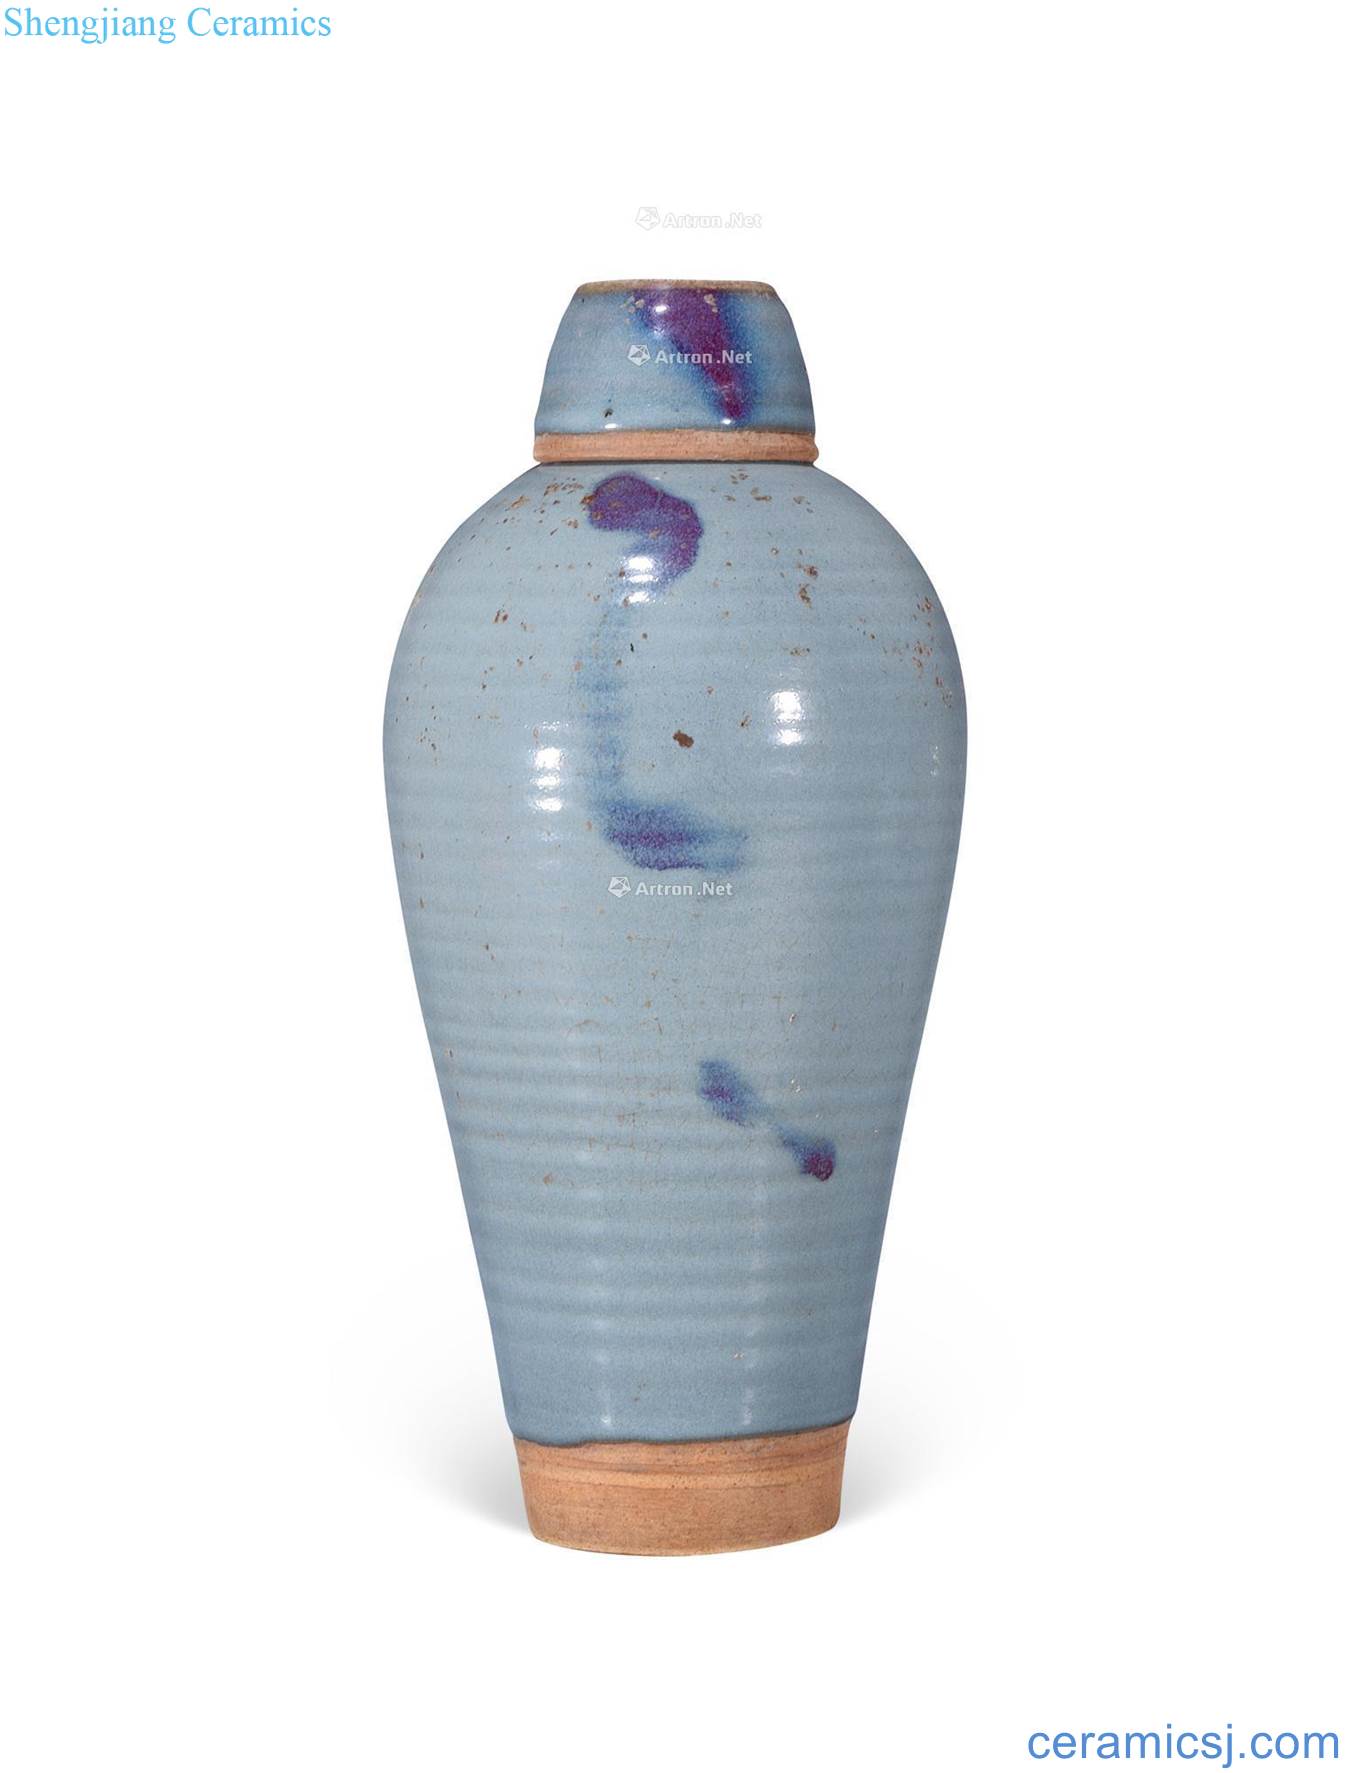 jinyuan Pa bowstring grain mei bottle with a cover on it